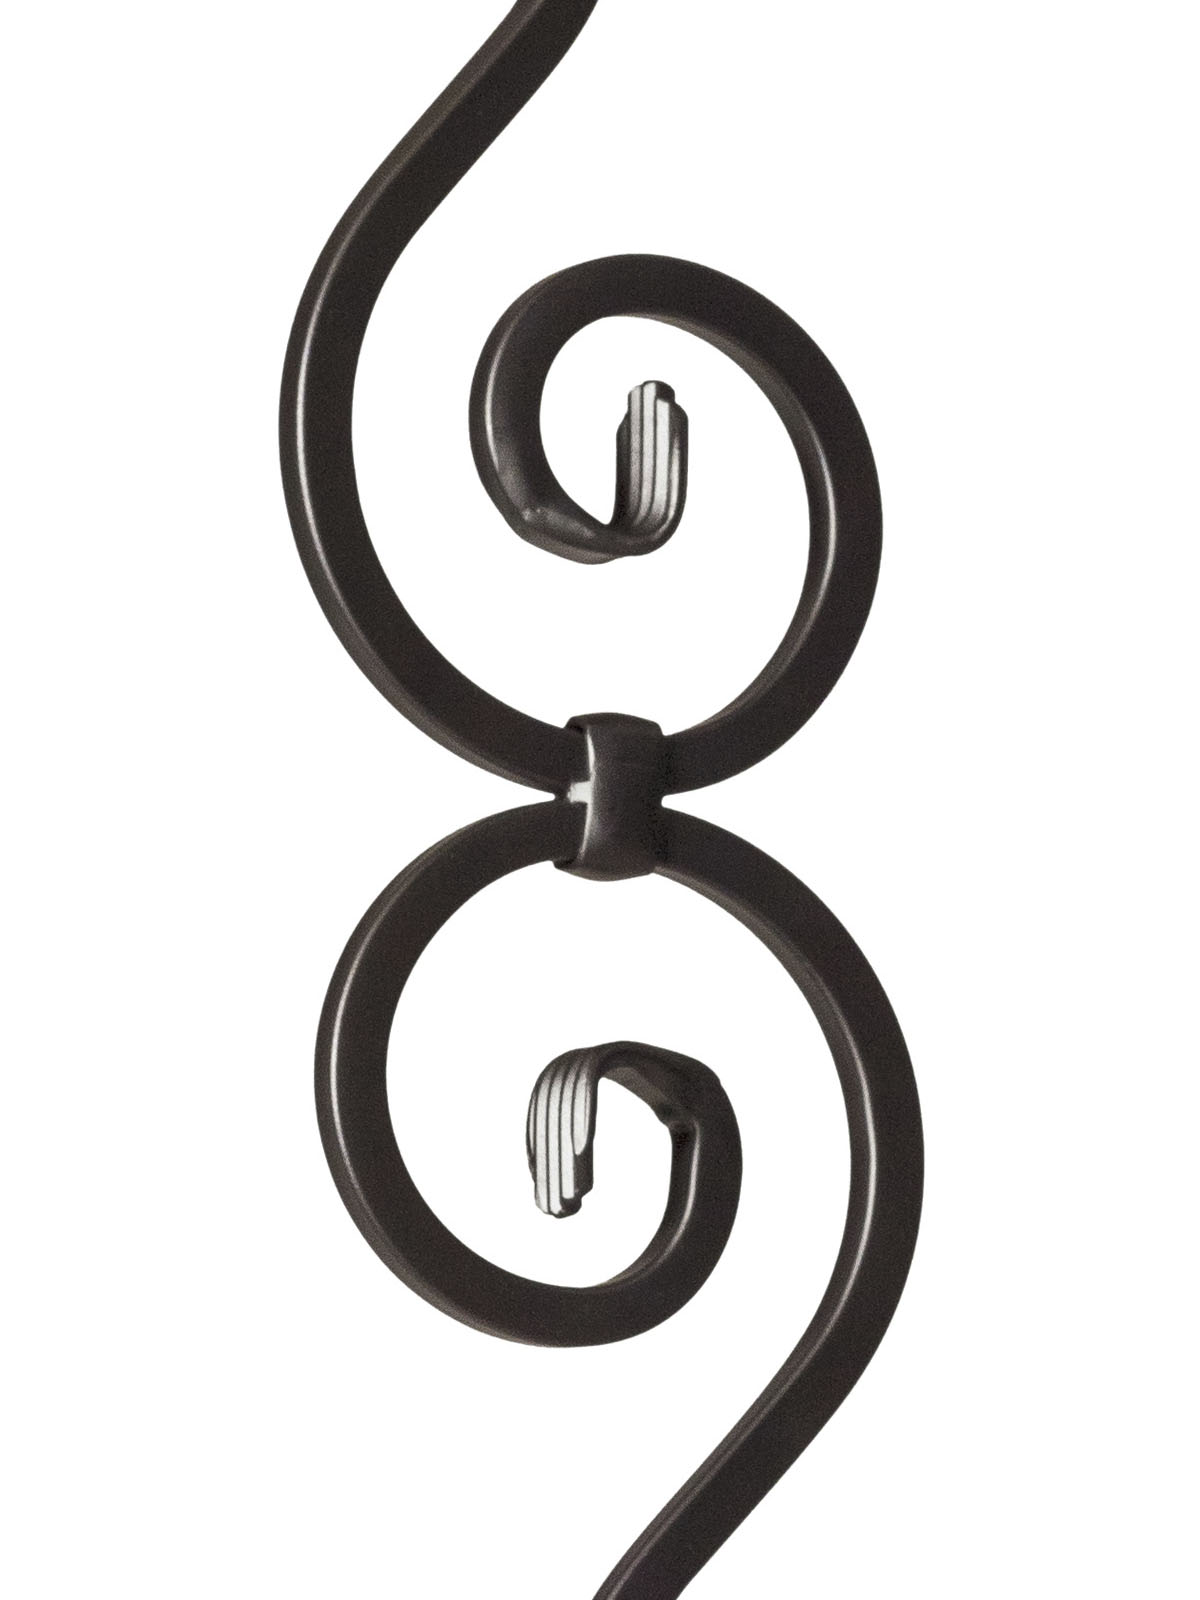 Iron Baluster 9090 - 1/2" Square - Spiral Scroll